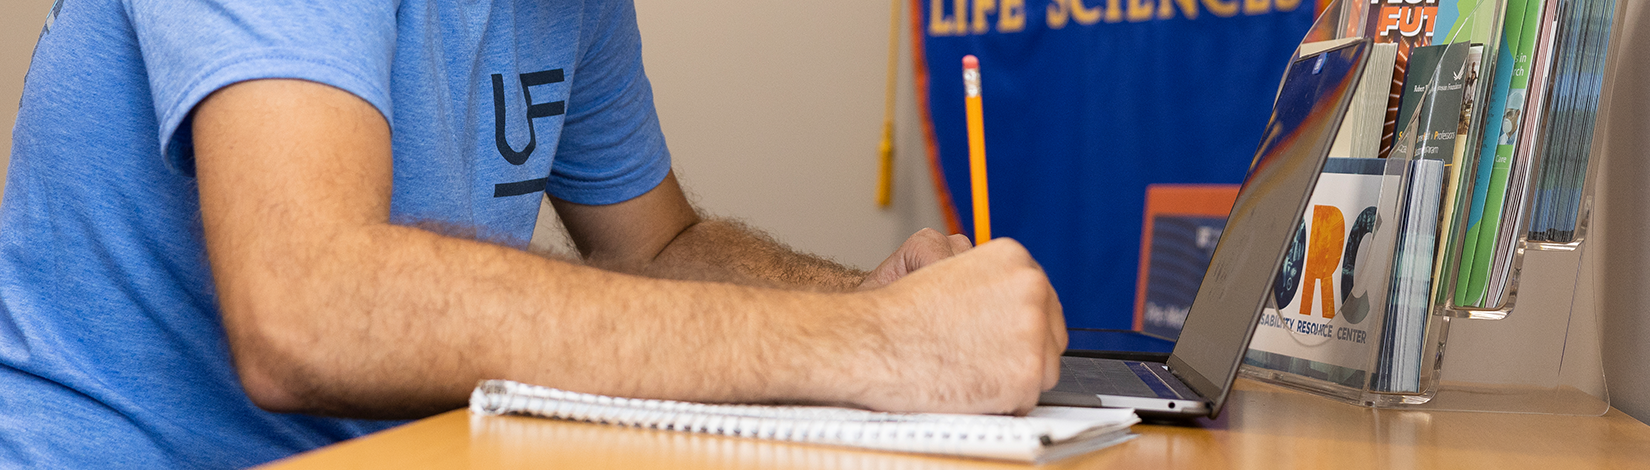 Student writes in a notebook with a pencil.